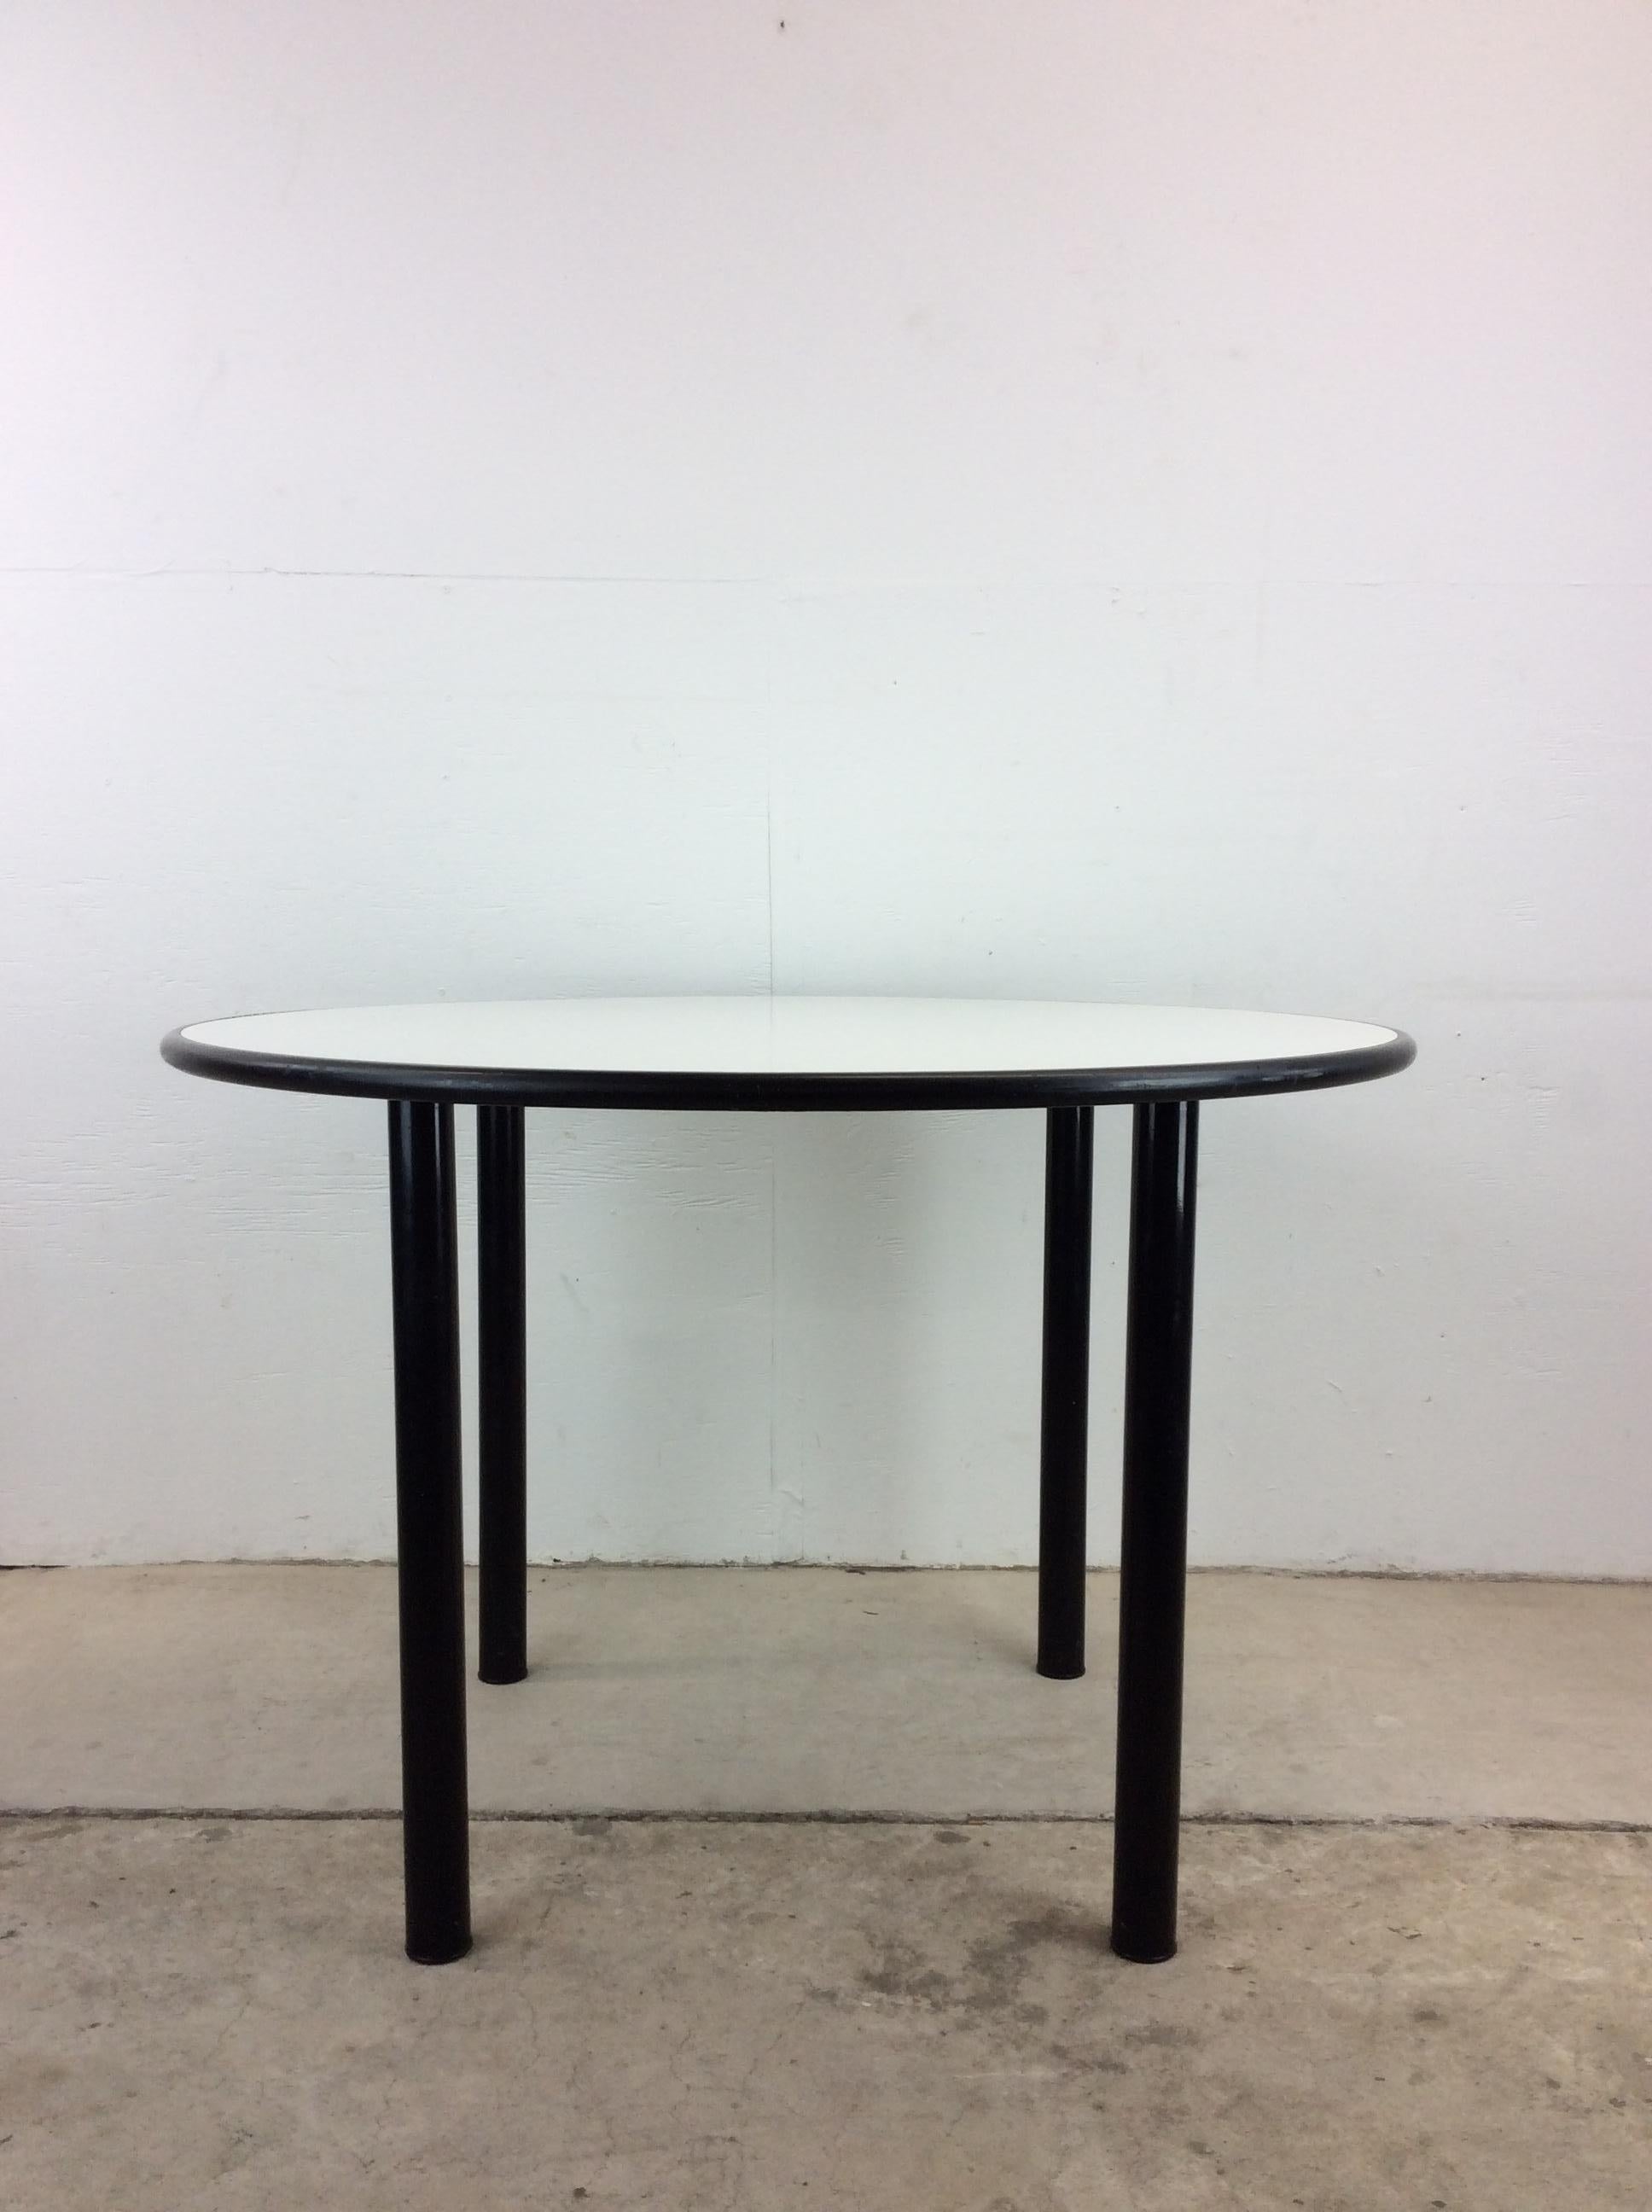 This vintage IKEA dining table features round design with white lacquer top and rounded black metal legs.

Complimentary set of 4 cafe style IKEA chairs available separately. 

Dimensions: 43w 43d 29h 27.5ch

Condition: Original white vinyl top has